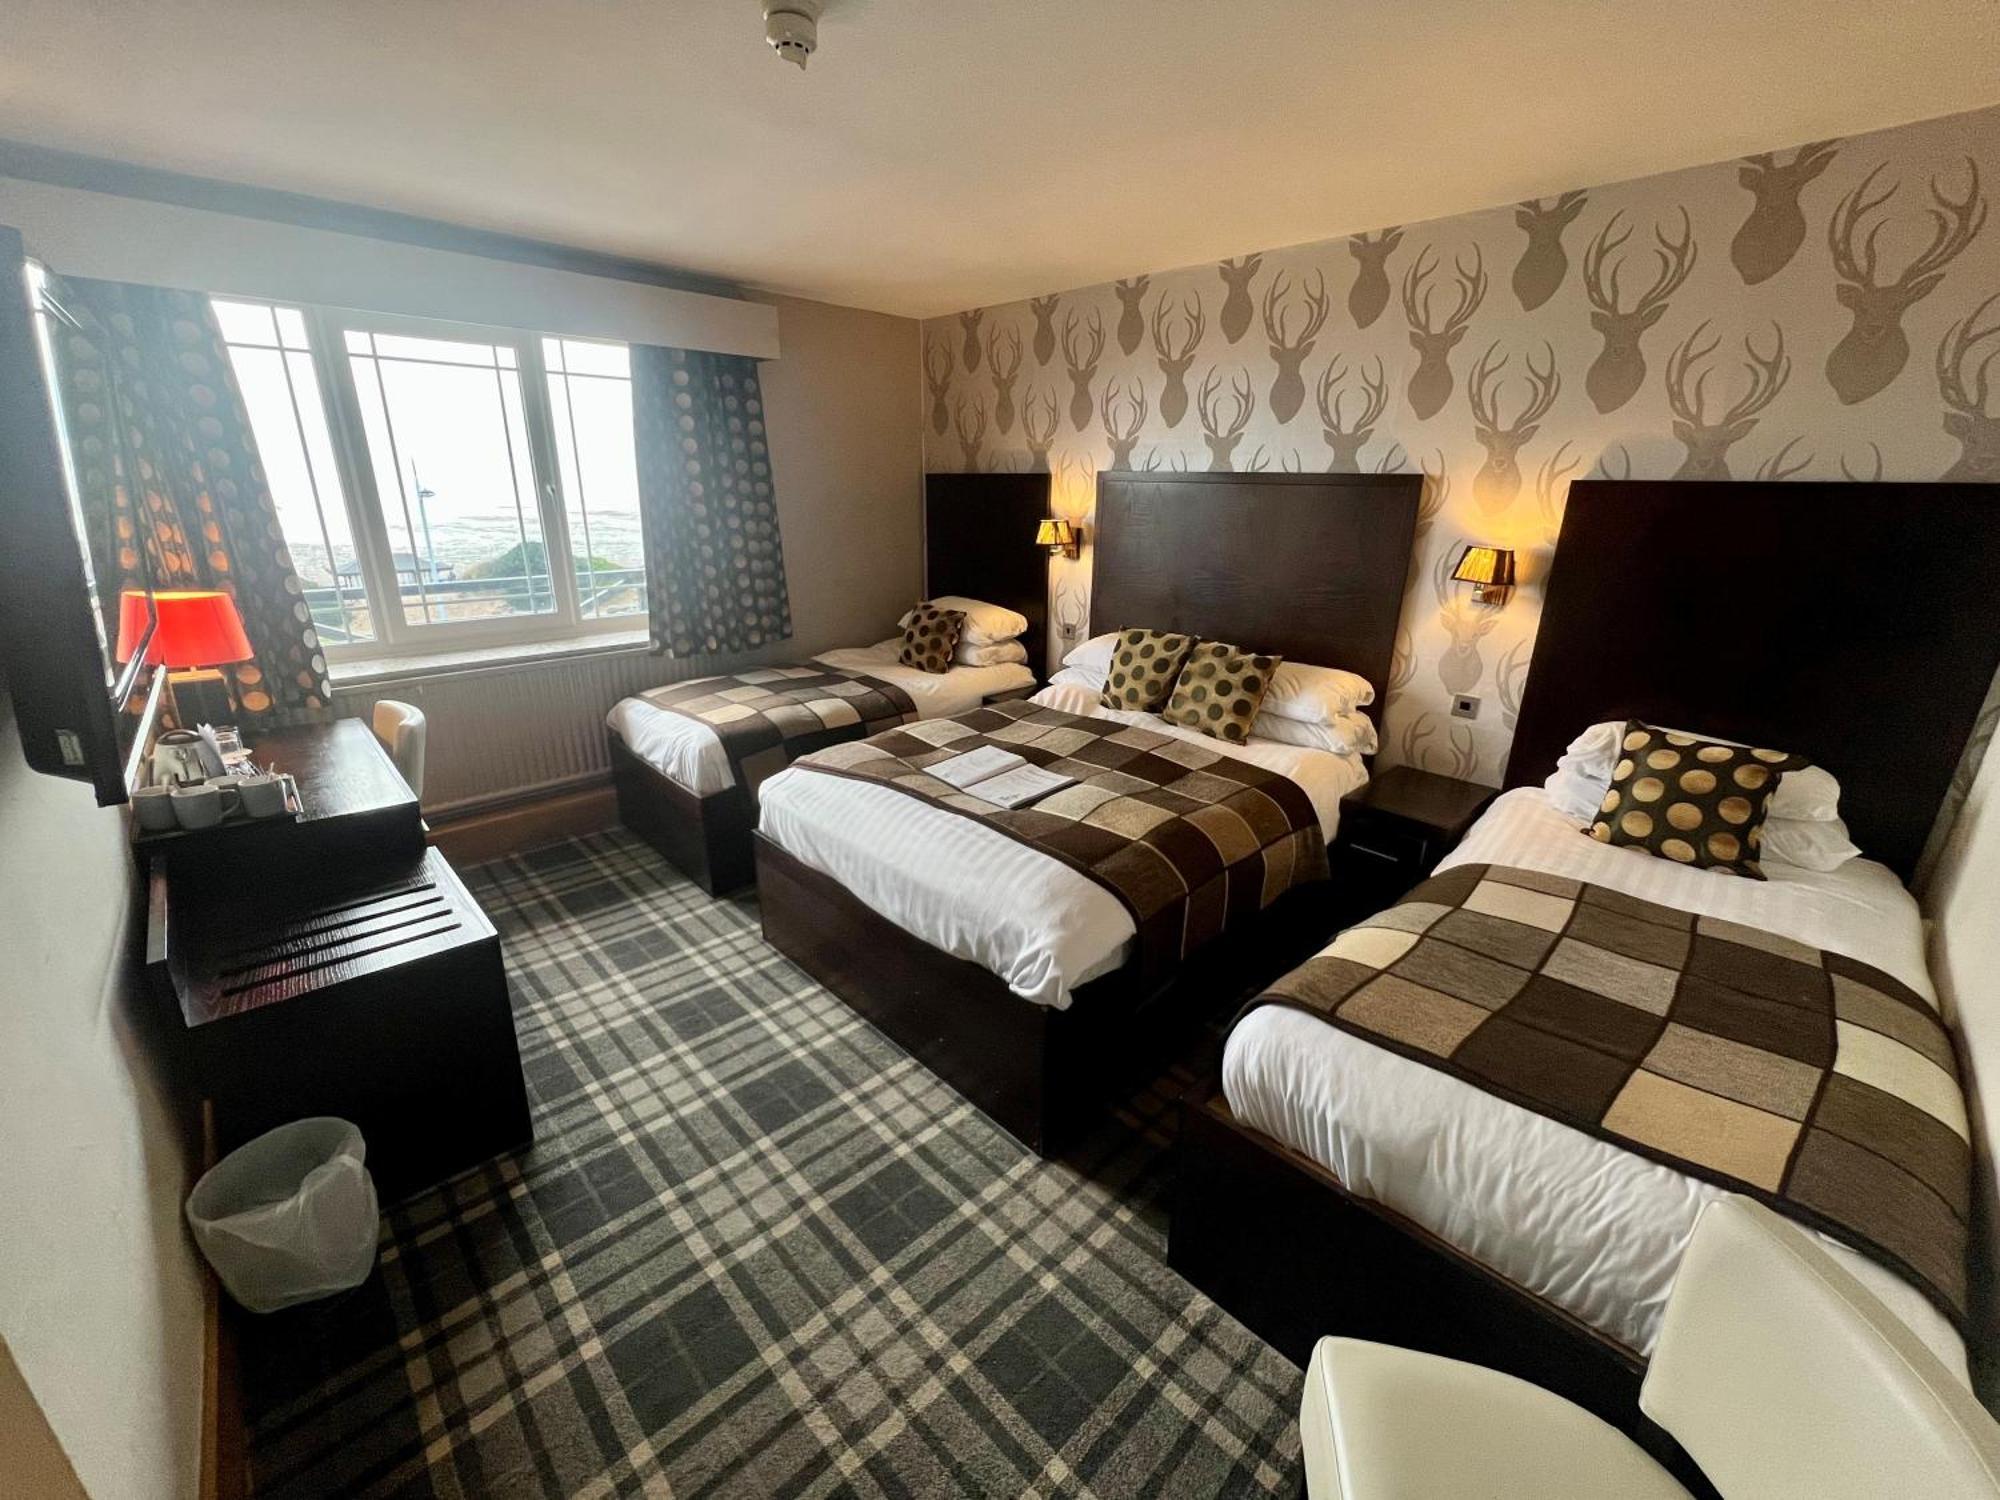 Inn On The Prom At The Fernlea Hotel Lytham St Annes Extérieur photo